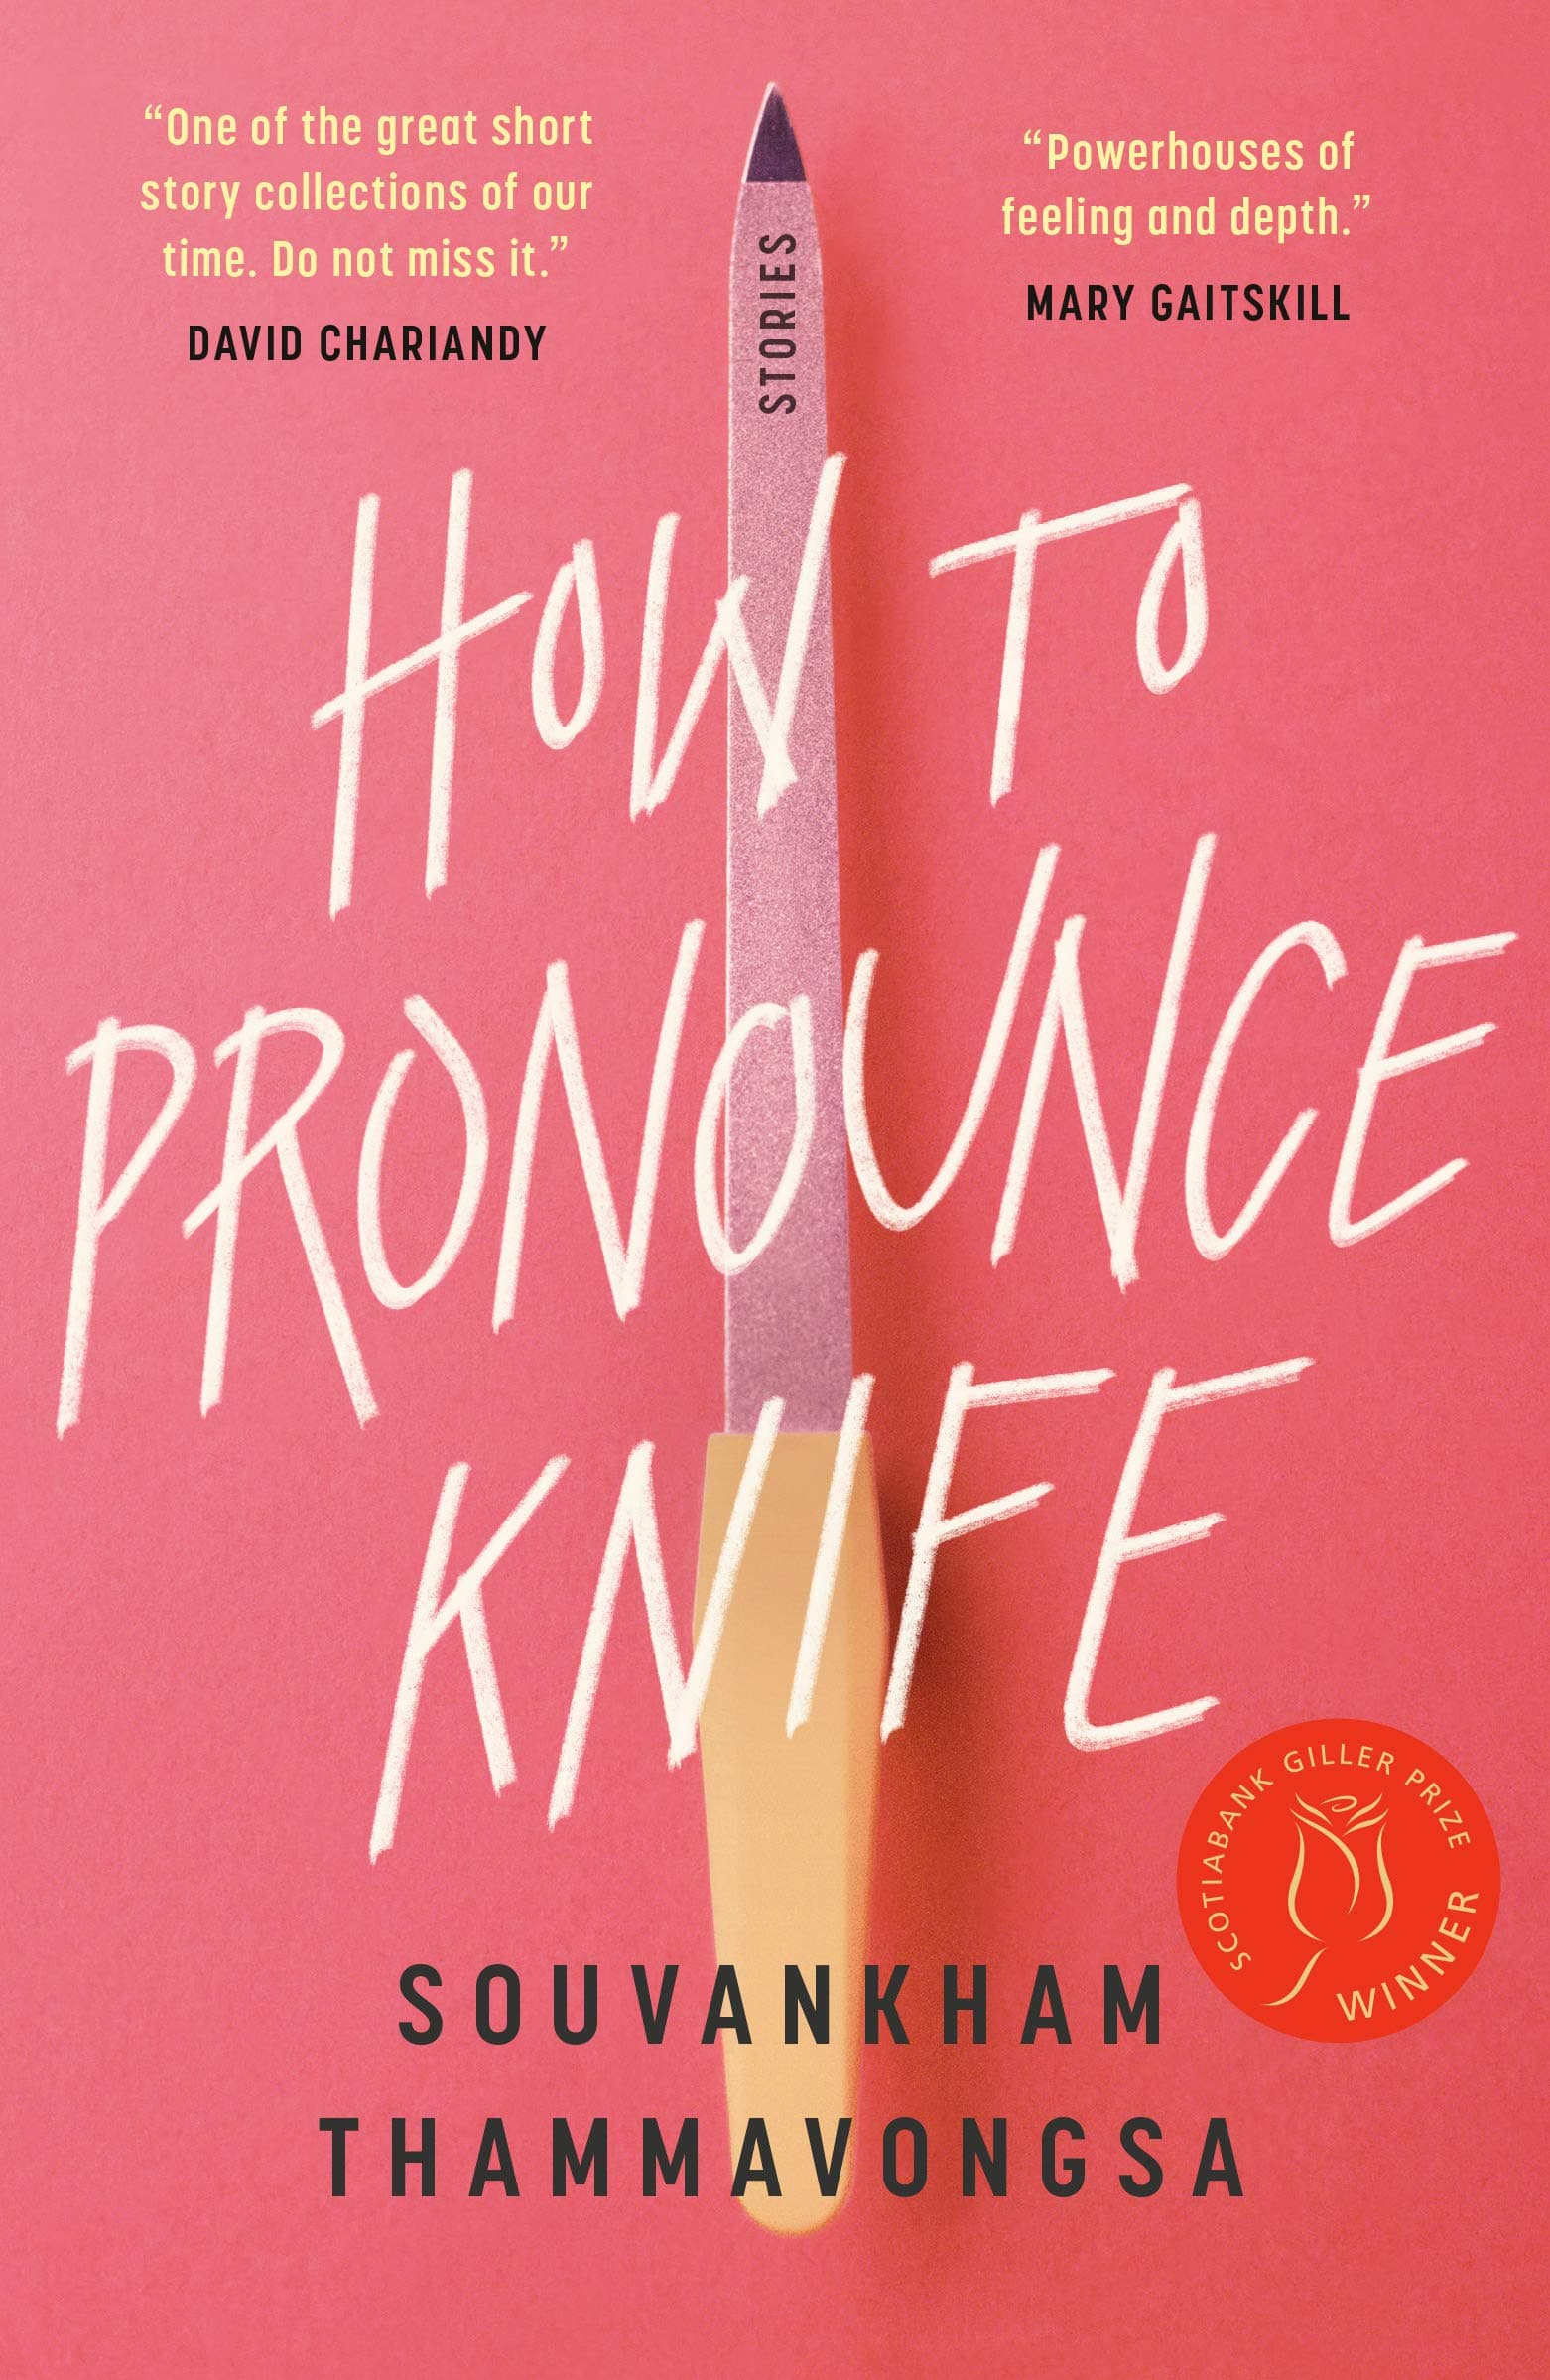 Book Cover of: "How to Pronounce Knife" By: Souvankham Thommavongsa